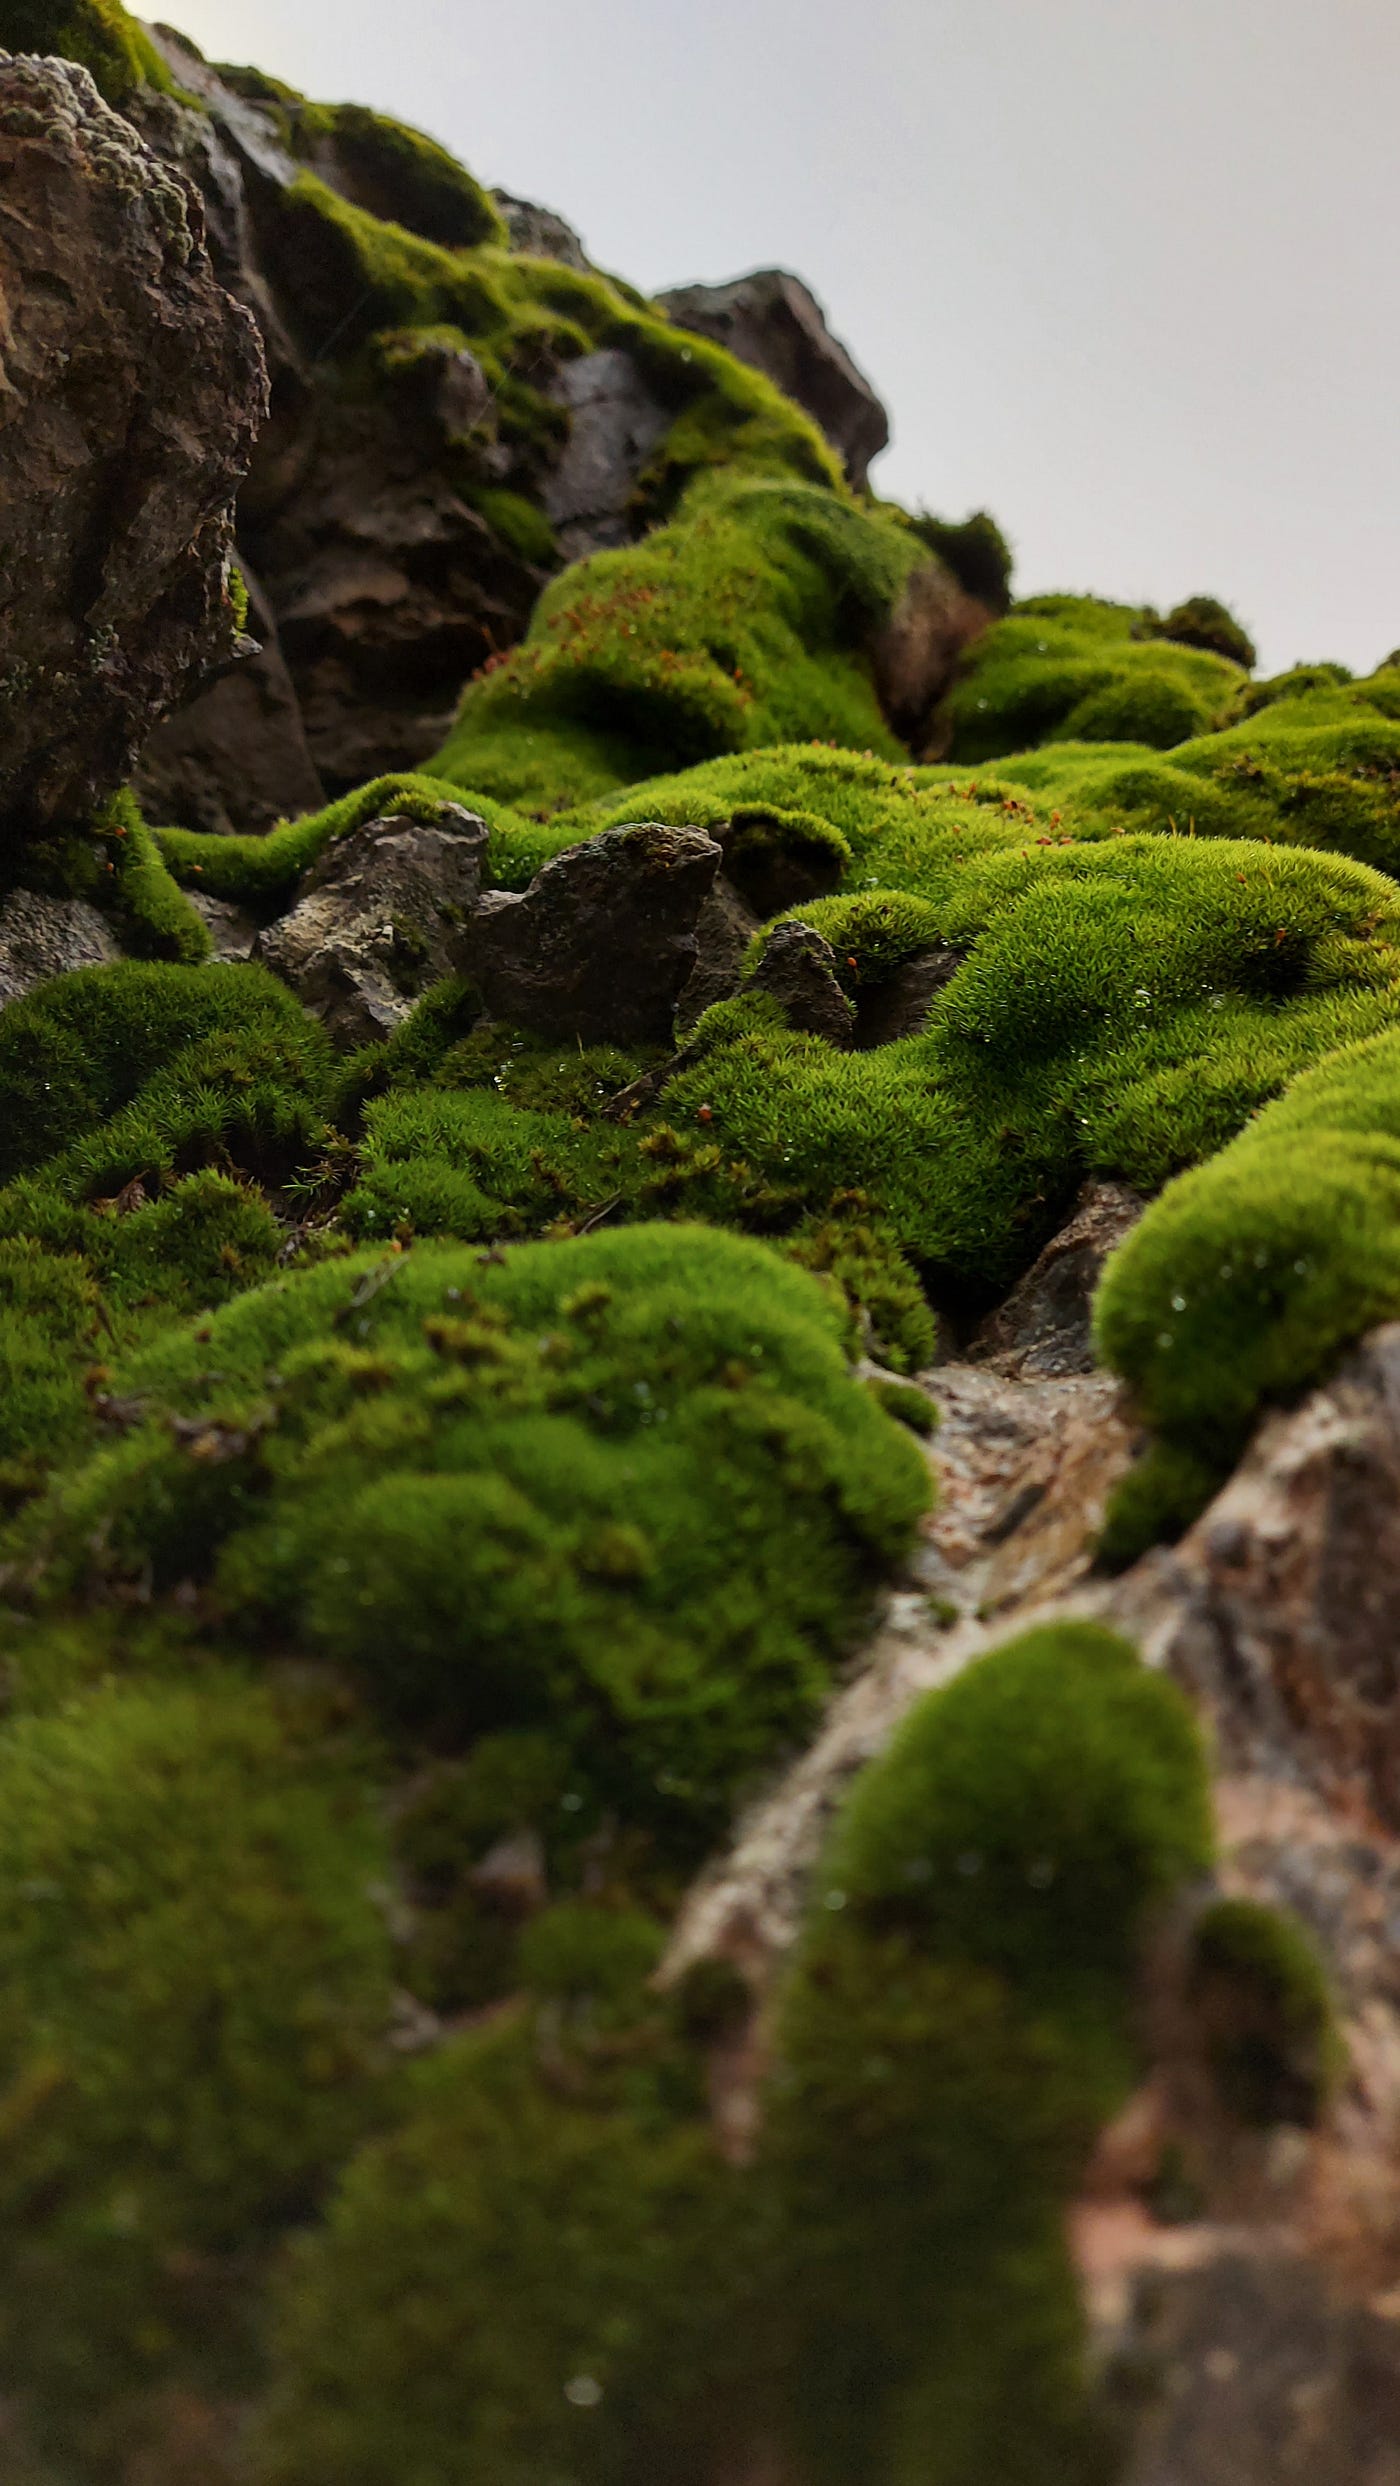 Whole moss carpet Can Make Any Space Beautiful and Vibrant